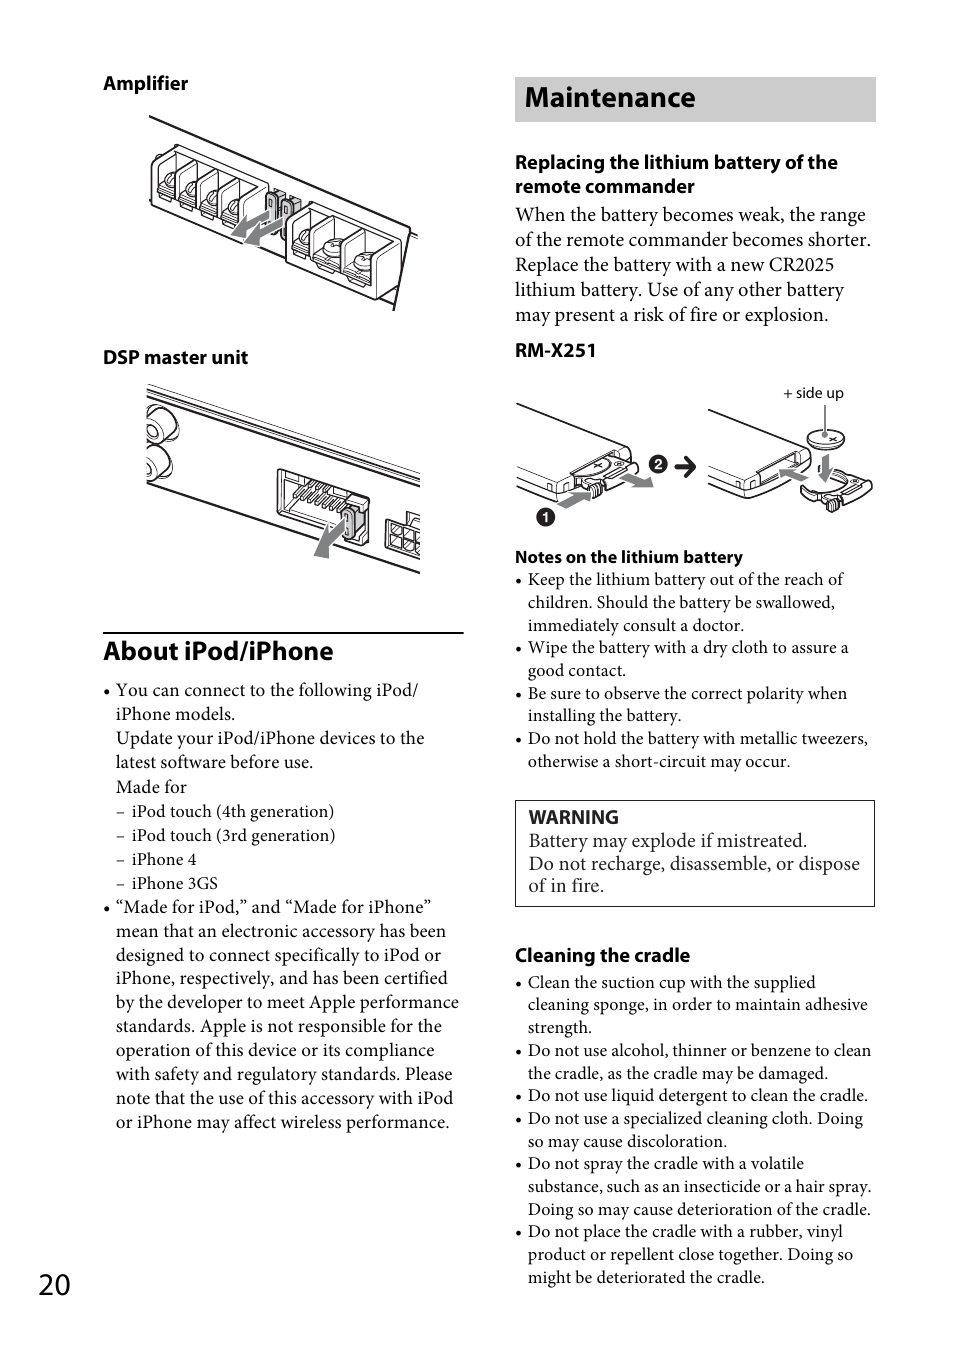 Maintenance, About ipod/iphone | Sony XDP-PK1000 User Manual | Page 20 / 52